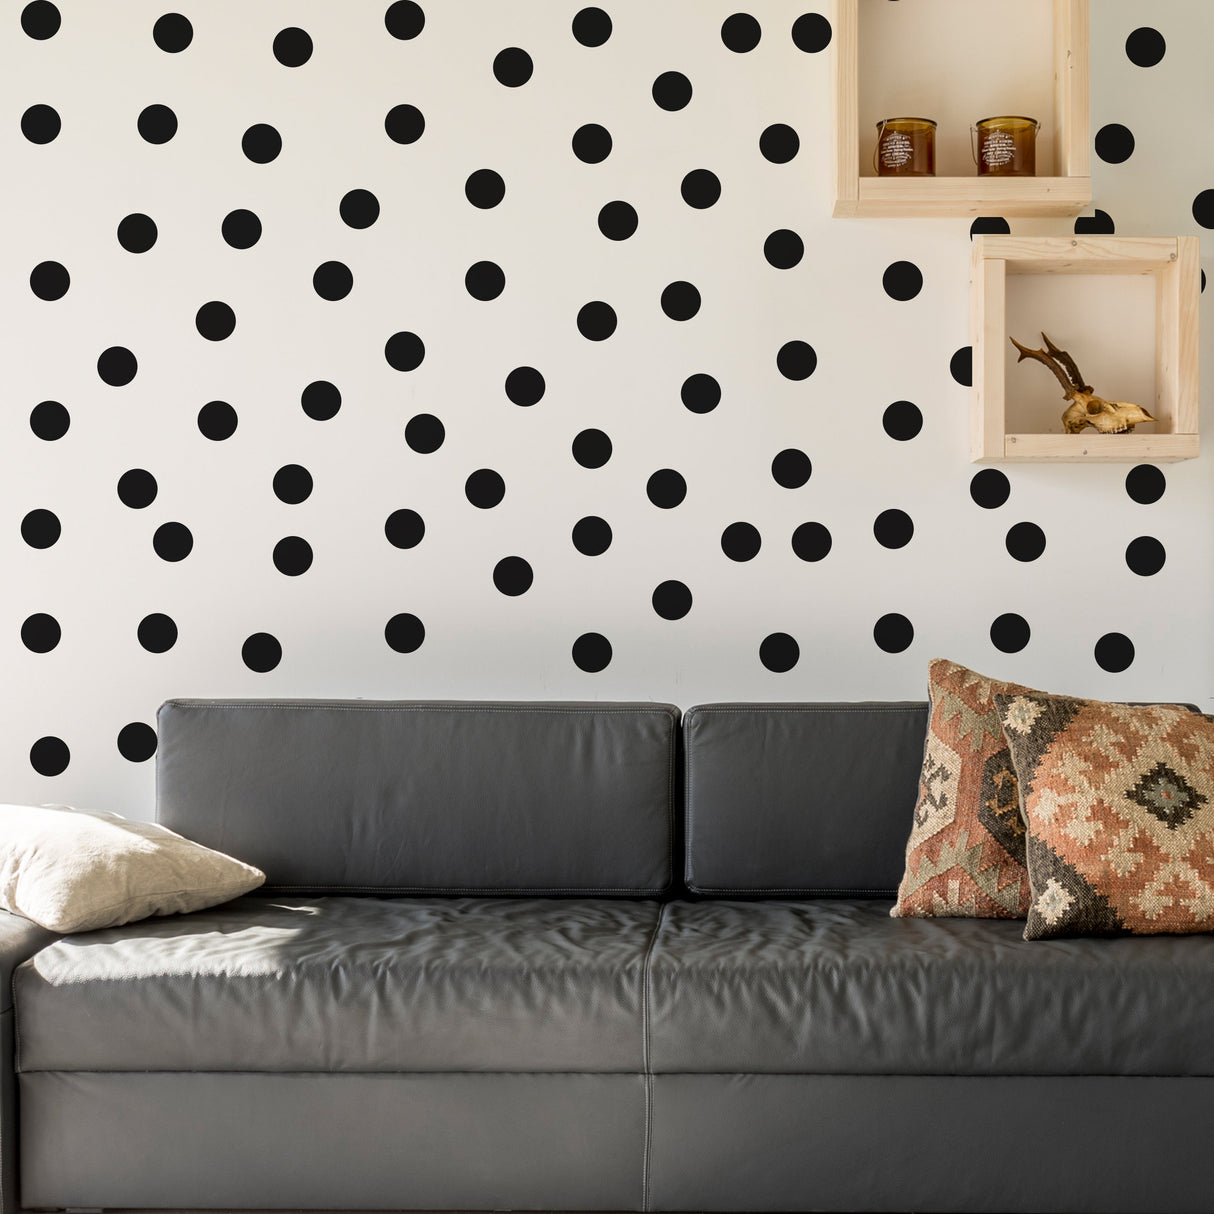 Circle Wall Stickers - Black 2 Inches Round Dot Labels